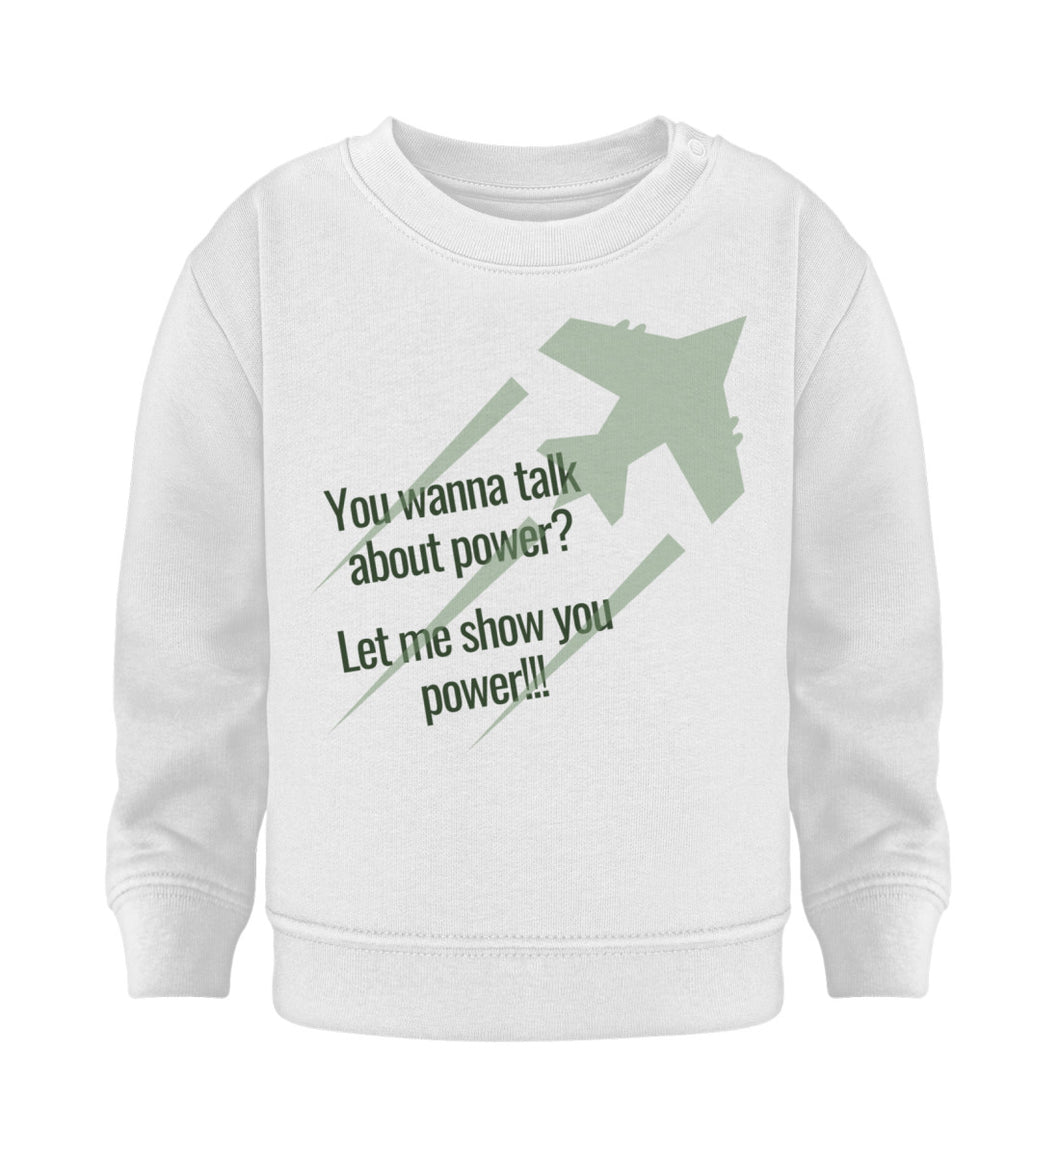 You wanna talk about power? - Baby Pullover